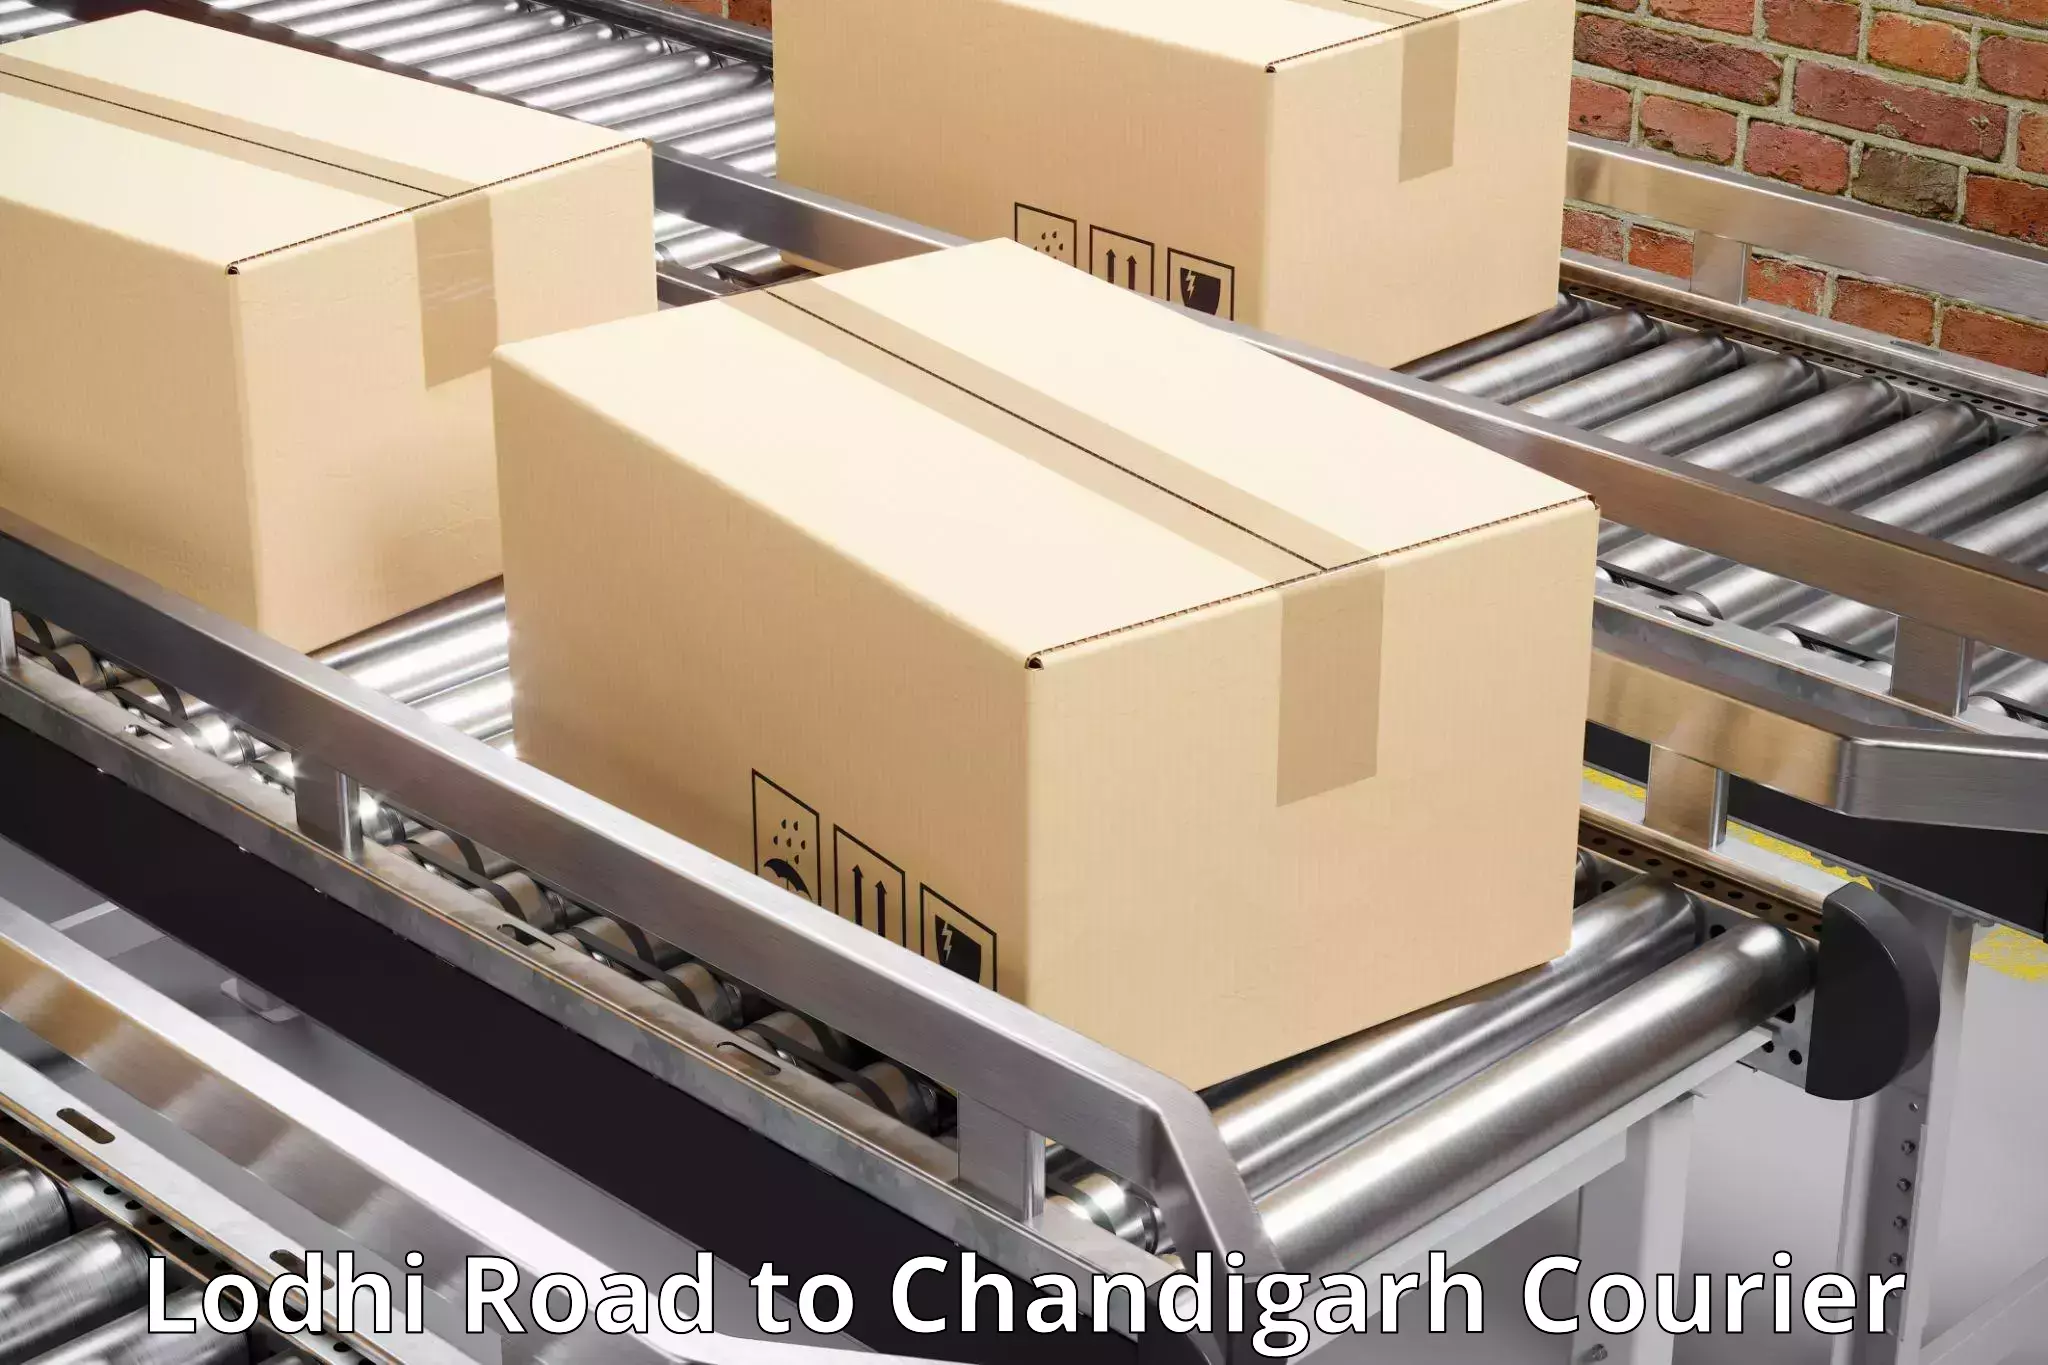 High-speed delivery Lodhi Road to Chandigarh